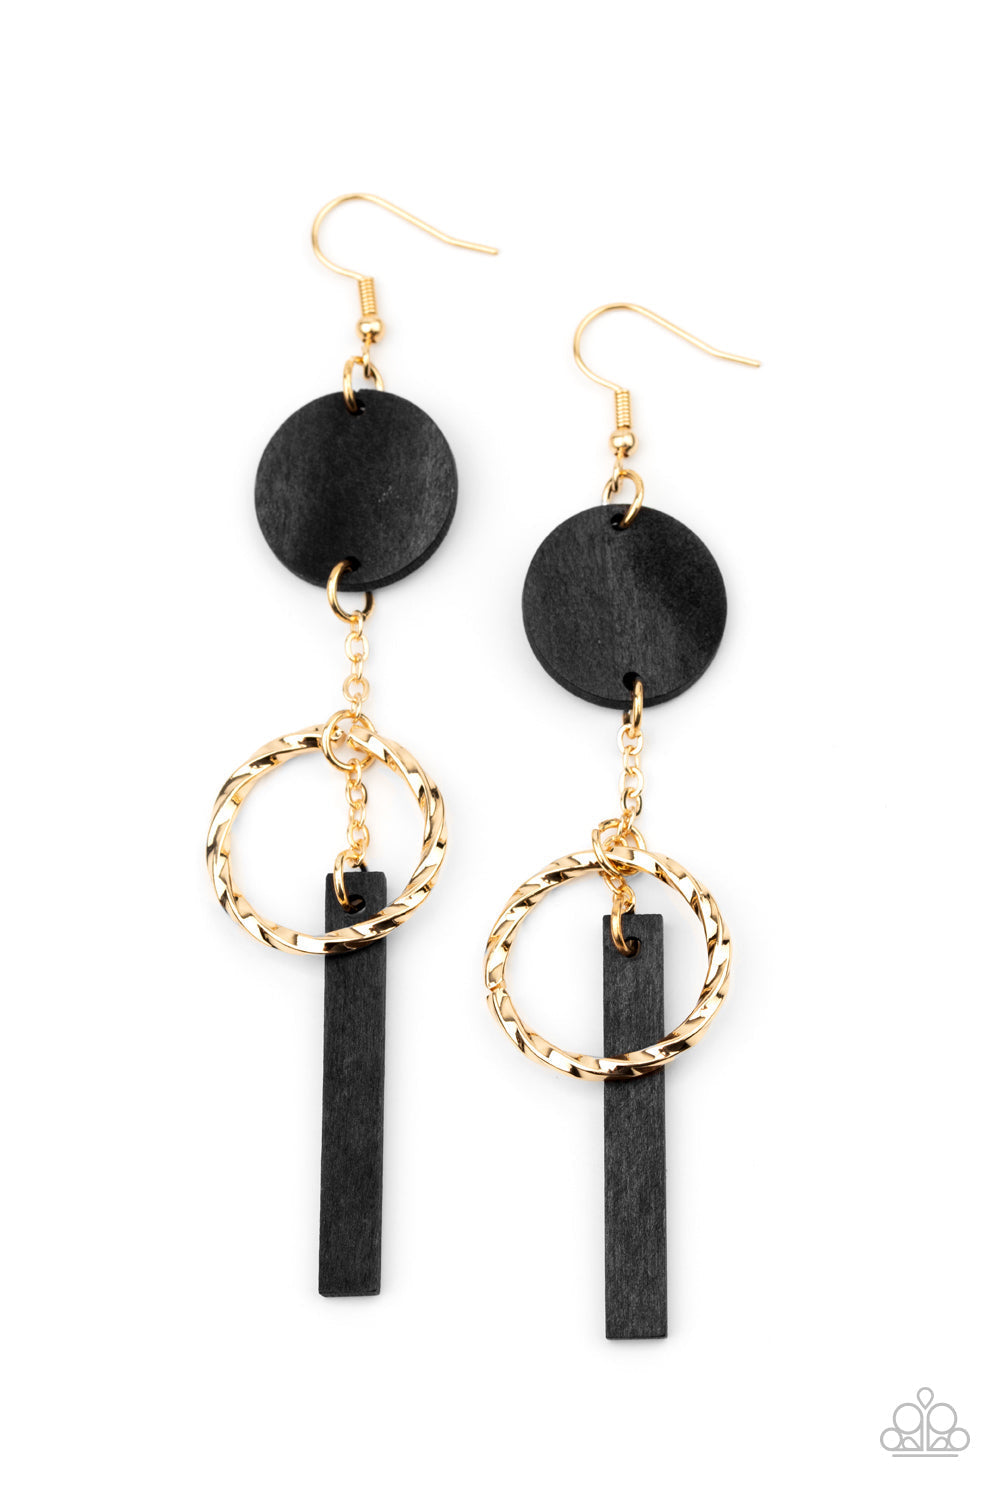 Raw Refinement - Black and Gold - Wood Earrings - Paparazzi Jewelry - Bejeweled Accessories By Kristie - A twisted gold hoop is suspended between round and rectangular black wooden frames, creating a refined lure. Earring attaches to a standard fishhook fitting. Trendy fashion jewelry for everyone.